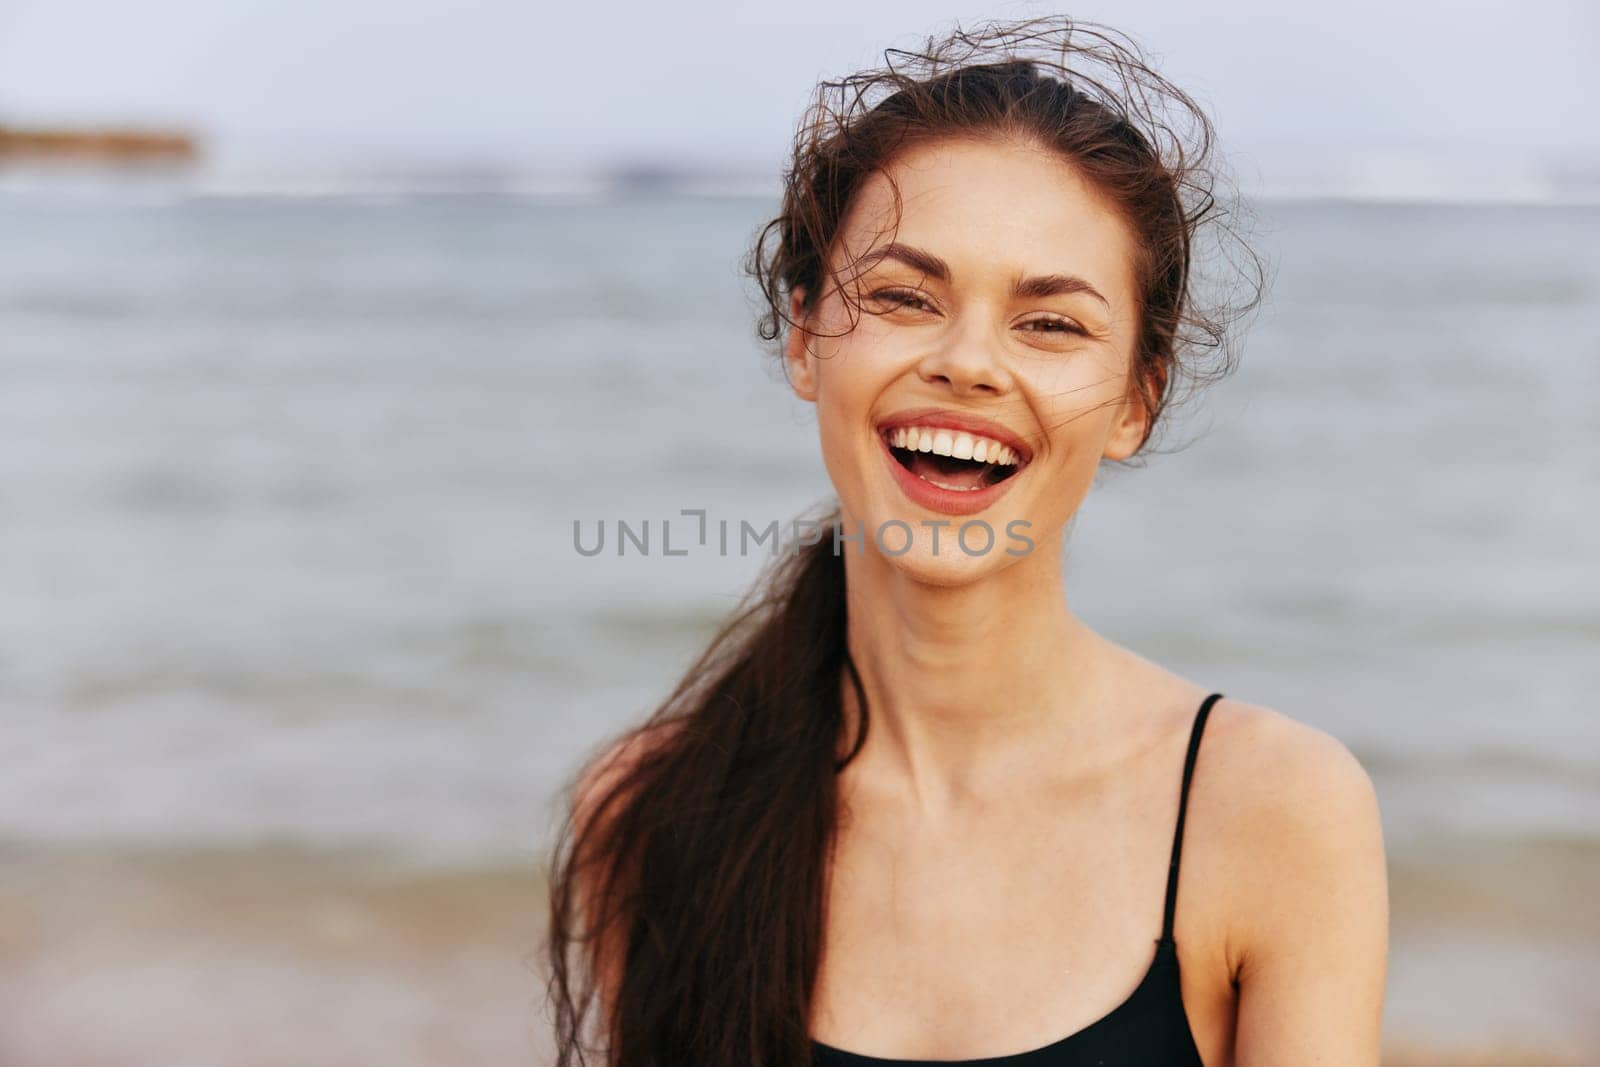 sunset woman smile beauty adult young peaceful freedom happy copy coast ocean female sand summer lifestyle beach holiday sea space smiling vacation